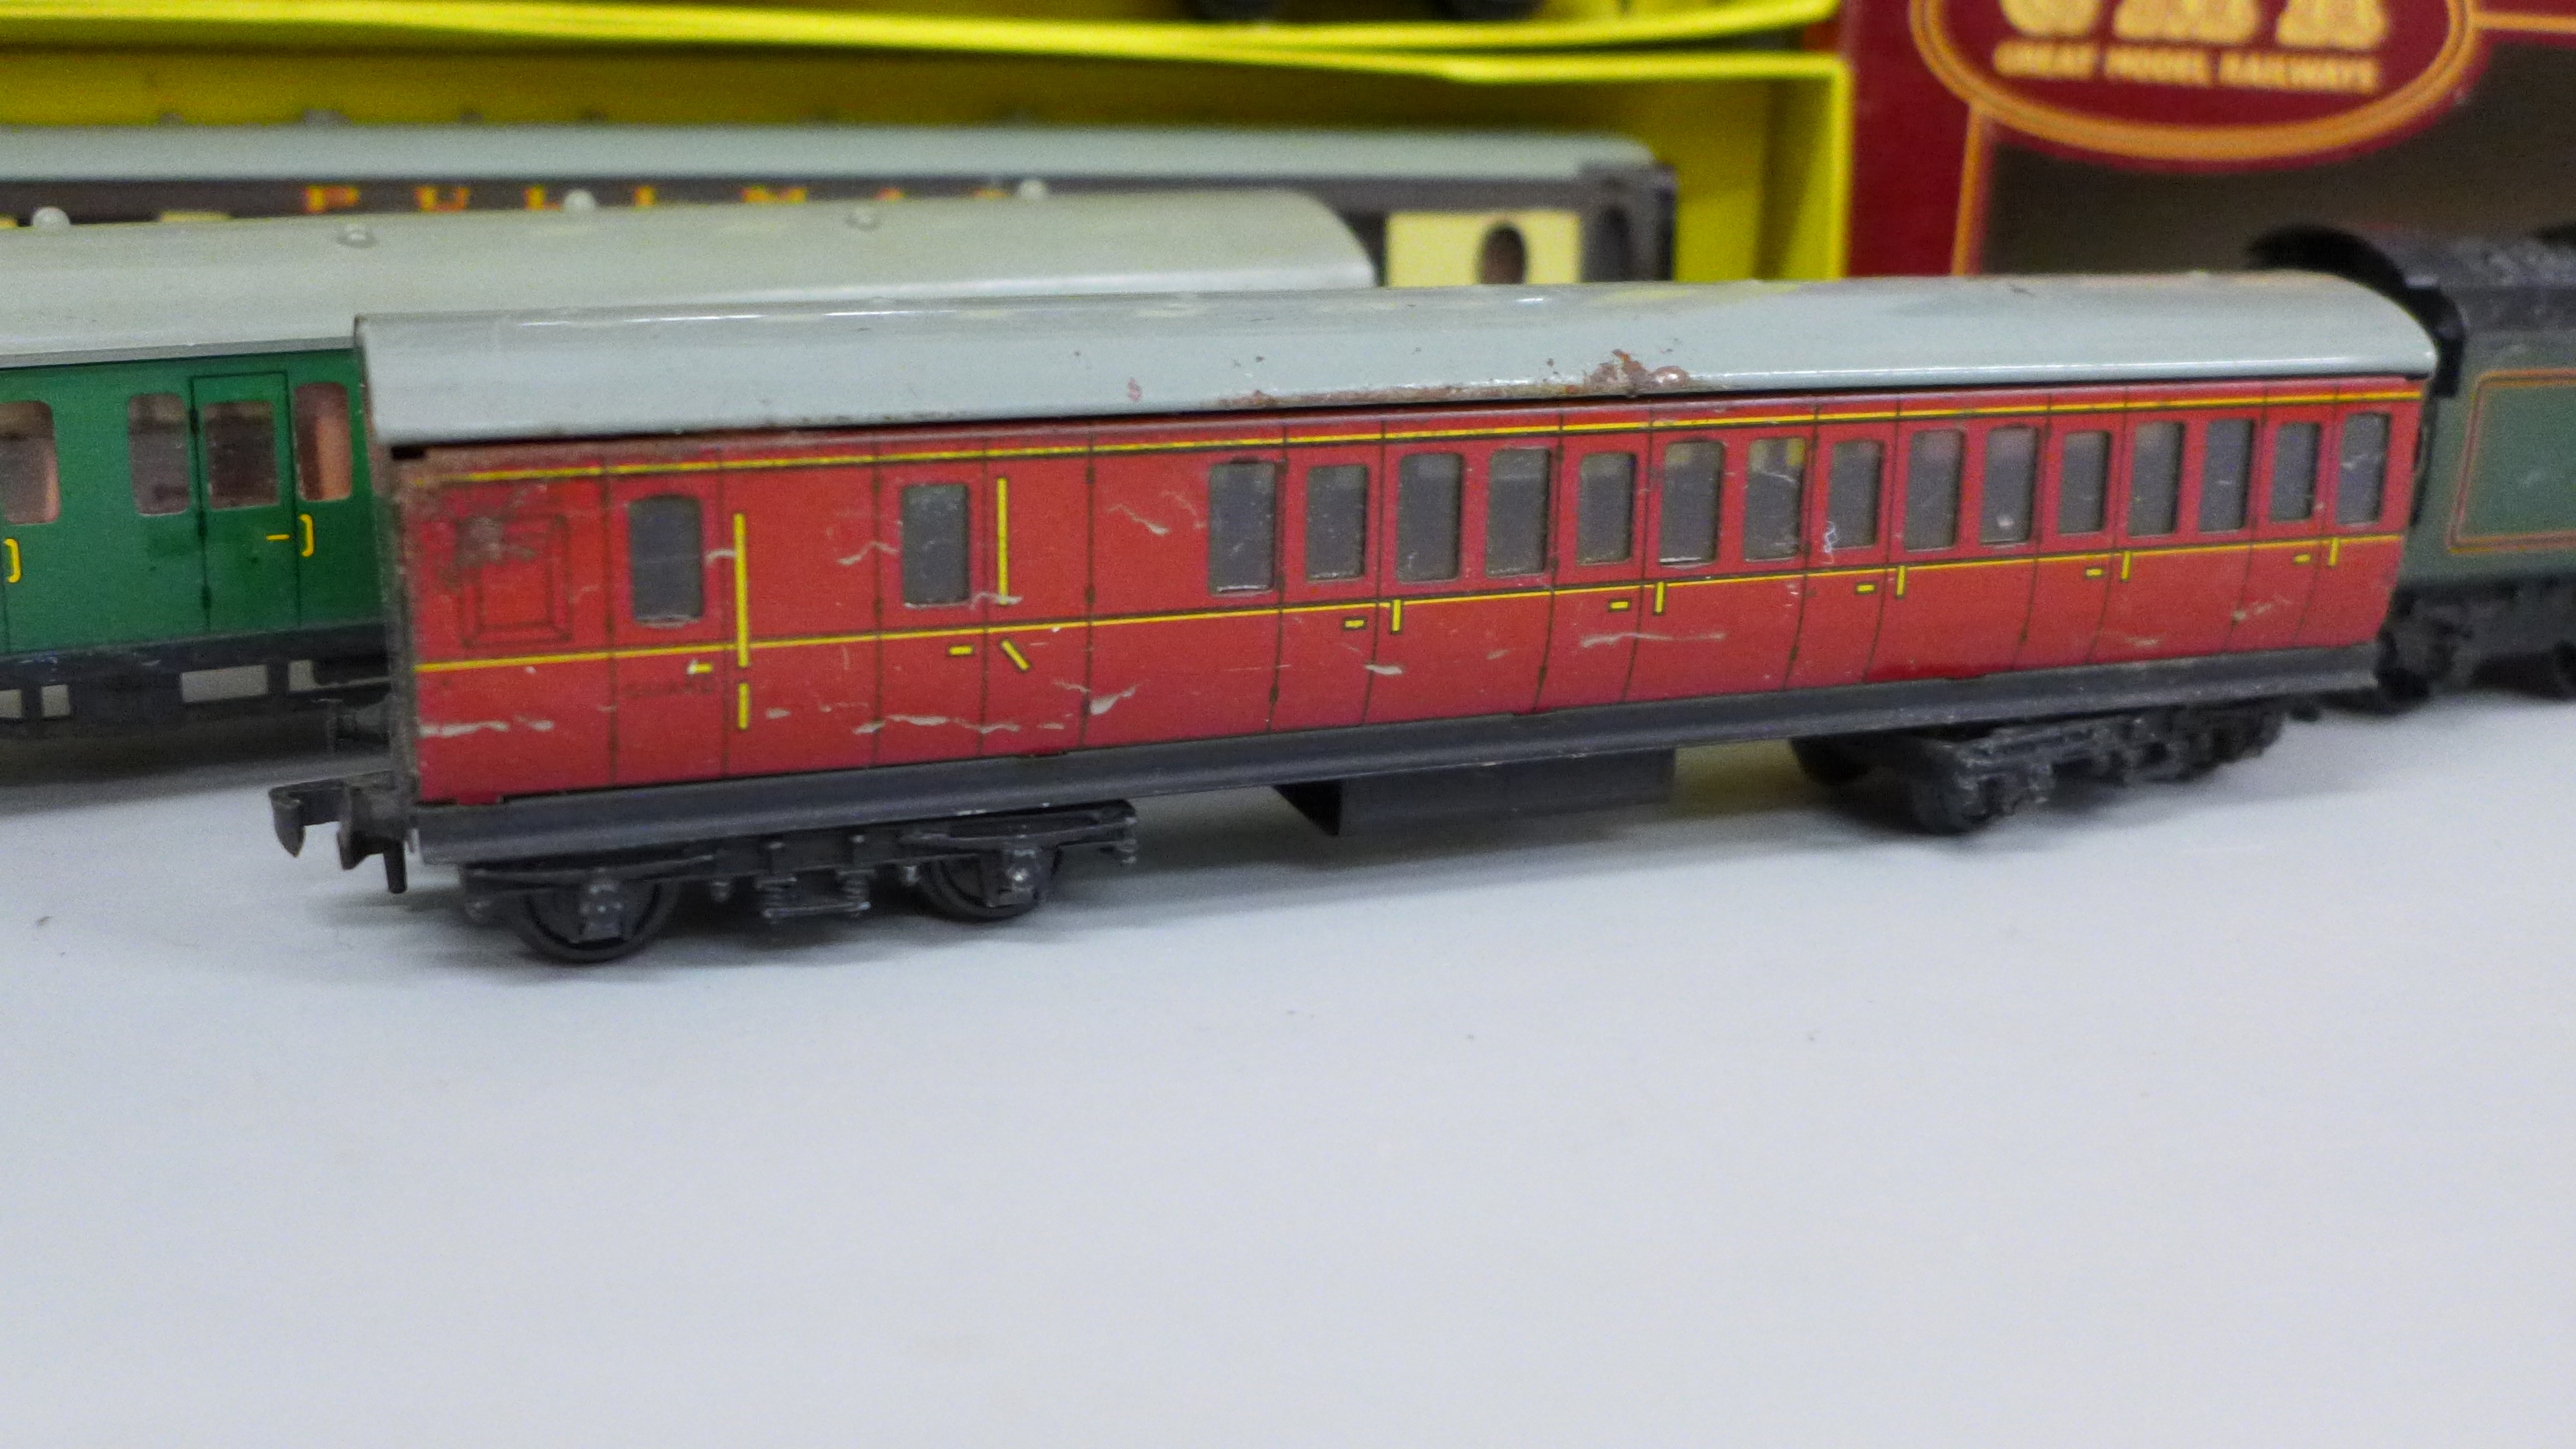 A collection of OO gauge coaches and wagons including Pullman and Corridor LMS GMR coach, boxed - Image 3 of 4